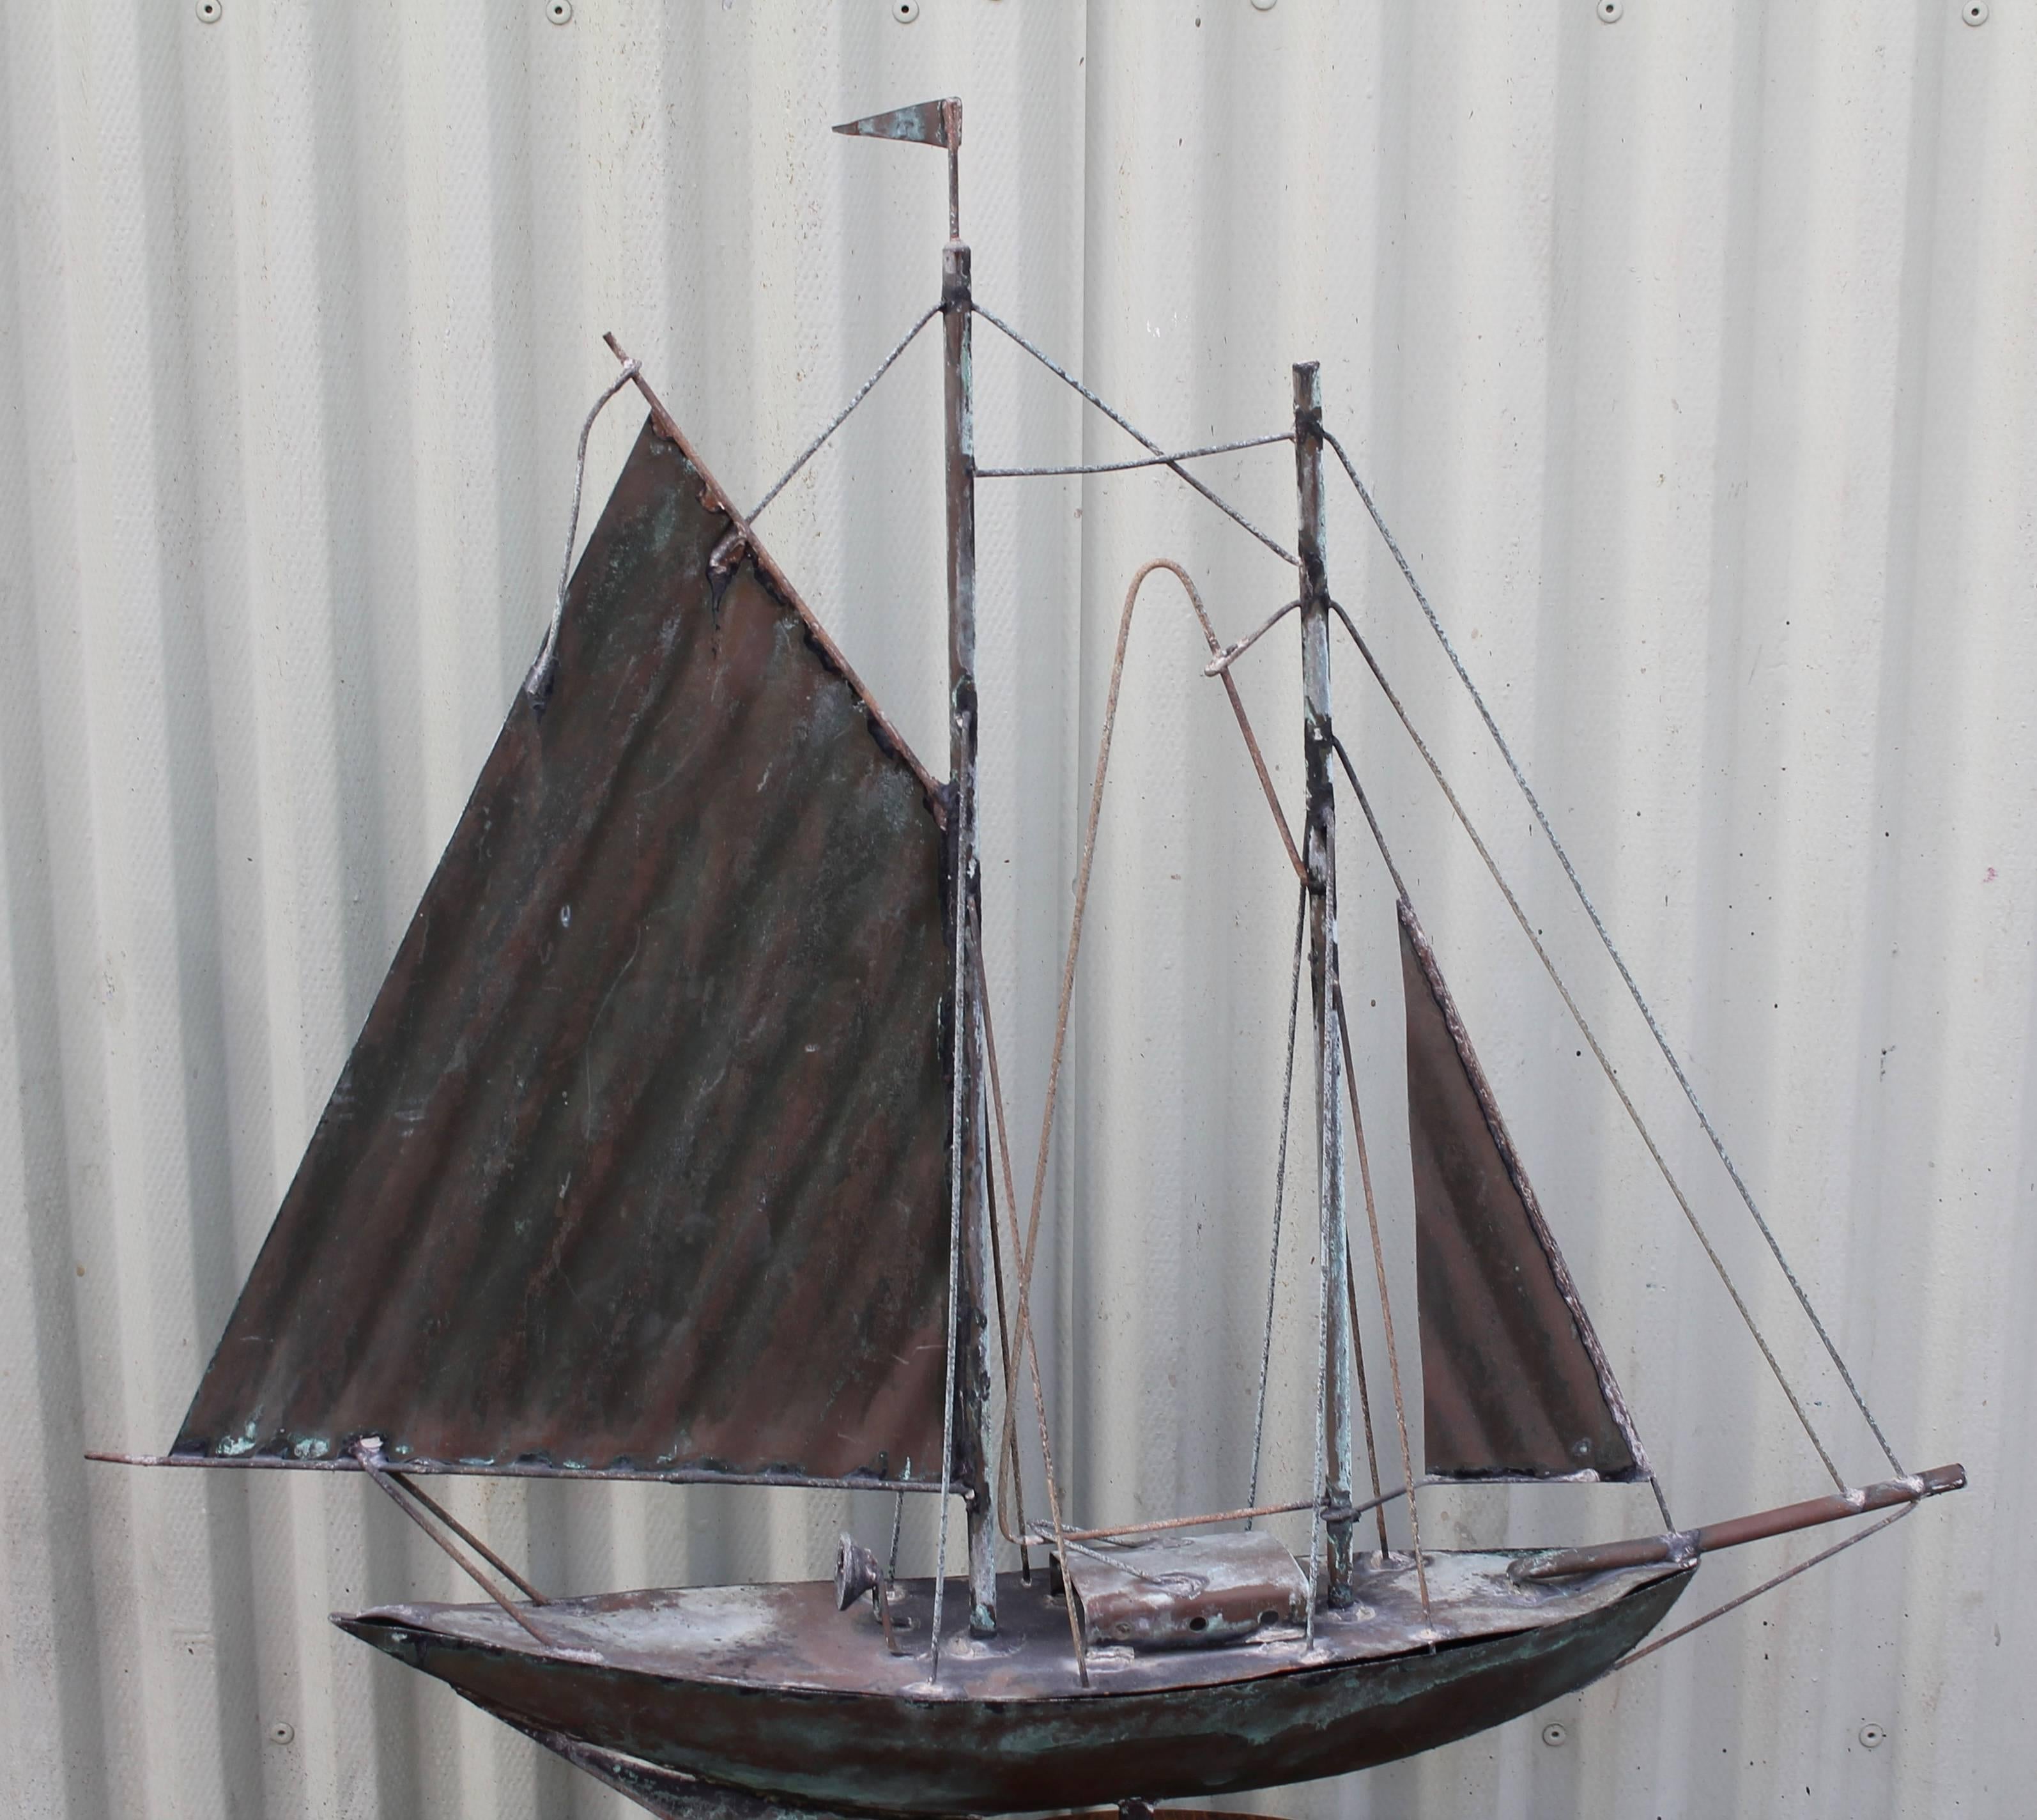 This wonderful copper sailboat weathervane is in good condition with a super verdigris surface. There are minor breaks in the mast ropes and only one flag flying. The condition is very good with wear consistent with age and use. This vane is on a